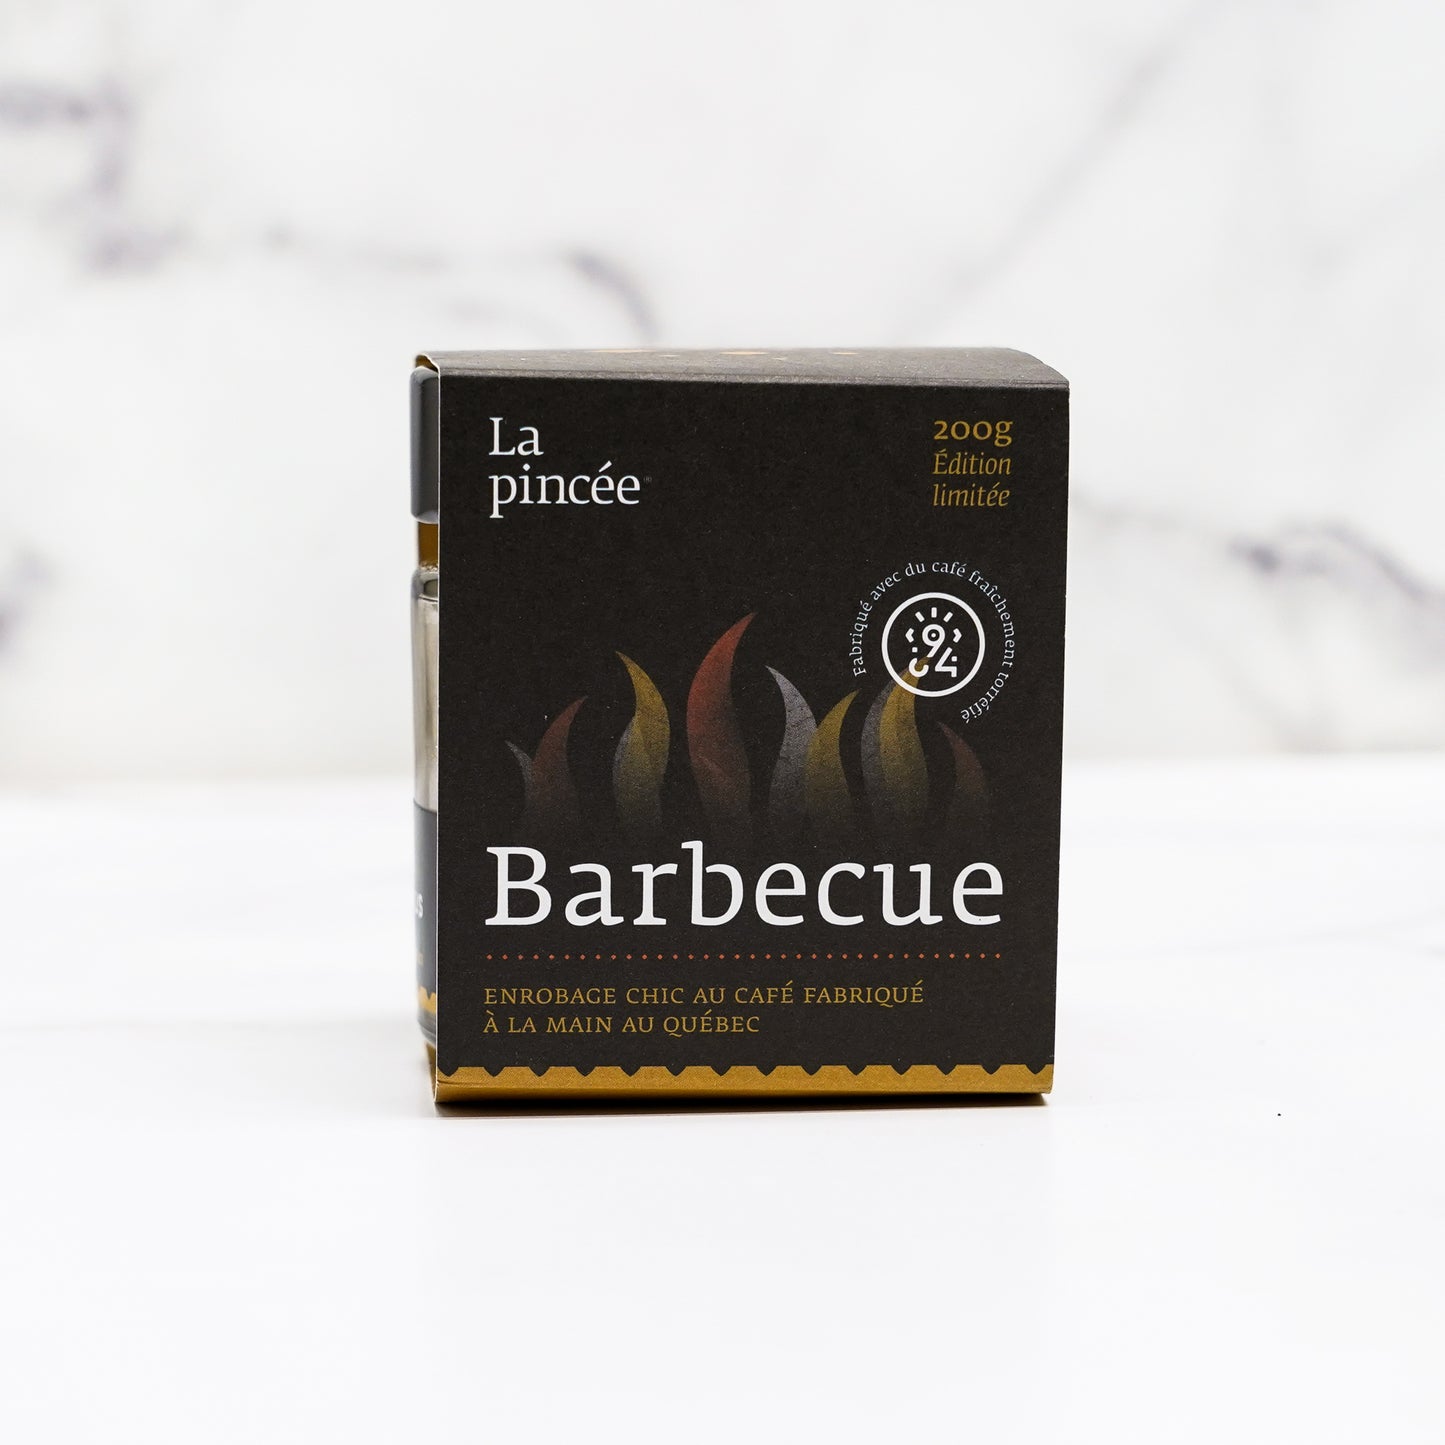 epices-barbecue-au-cafe-la-pincee-edition-limitee-montreal,epices-barbecue,produit-quebecois,ahuntsic,achat-loca,boutique-casa-luca,montreal,barbecue,bbq,